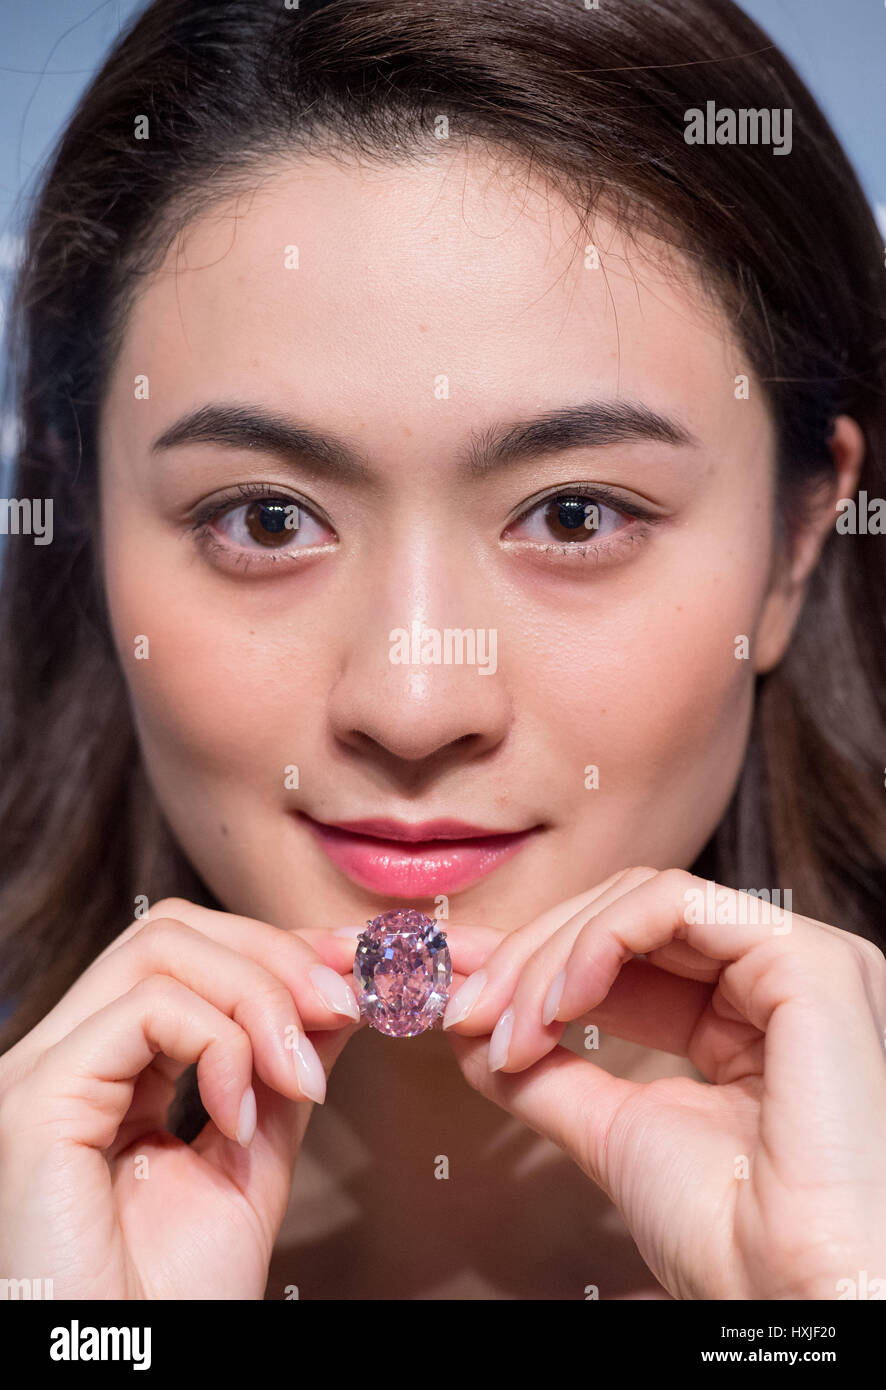 Hong Kong, Hong Kong SAR, China. 29th Mar, 2017. A model shows the 59.60 carat Pink Star diamond, expected to fetch US$60 million plus, to the press at Sotheby's auction house, Hong Kong.The Pink Star Diamond is extremely rare and is the largest internally flawless fancy vivid Pink Diamond ever graded by the GIA Credit: Jayne Russell/ZUMA Wire/Alamy Live News Stock Photo